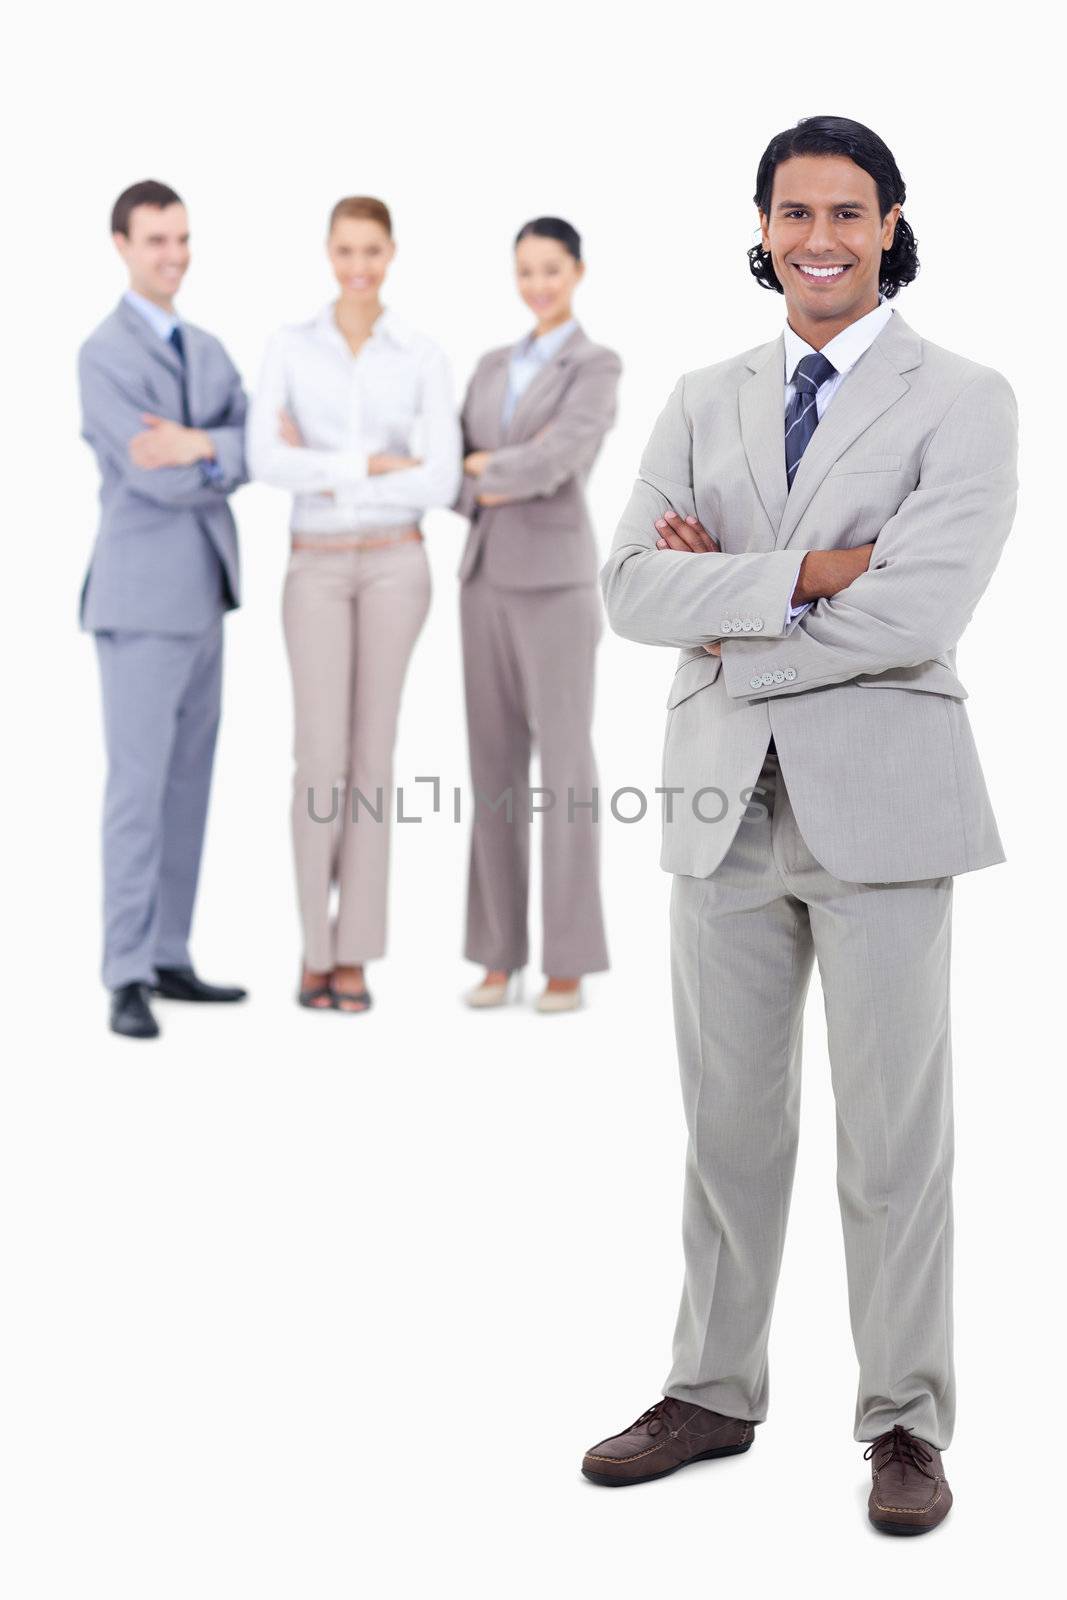 Businessman smiling and crossing his arms with happy people behind him against white background